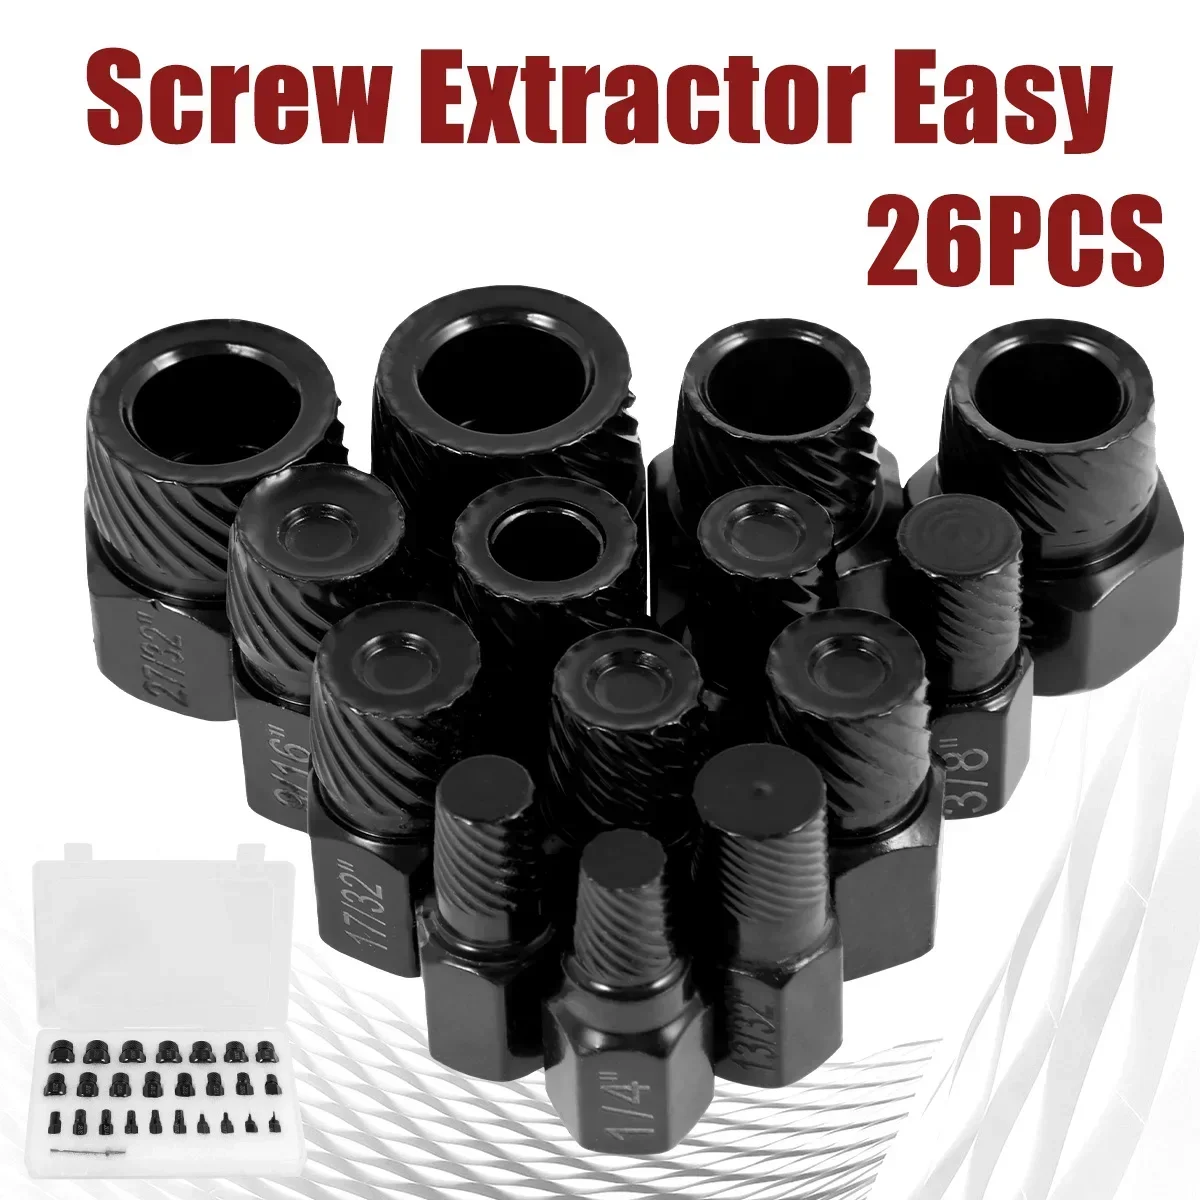 

Bolt Nut Extractor Damaged Impact Bolt Nut Remover Tool Broken Screw Stud Removal 3/8in Rusted Screw Extraction Socket Set